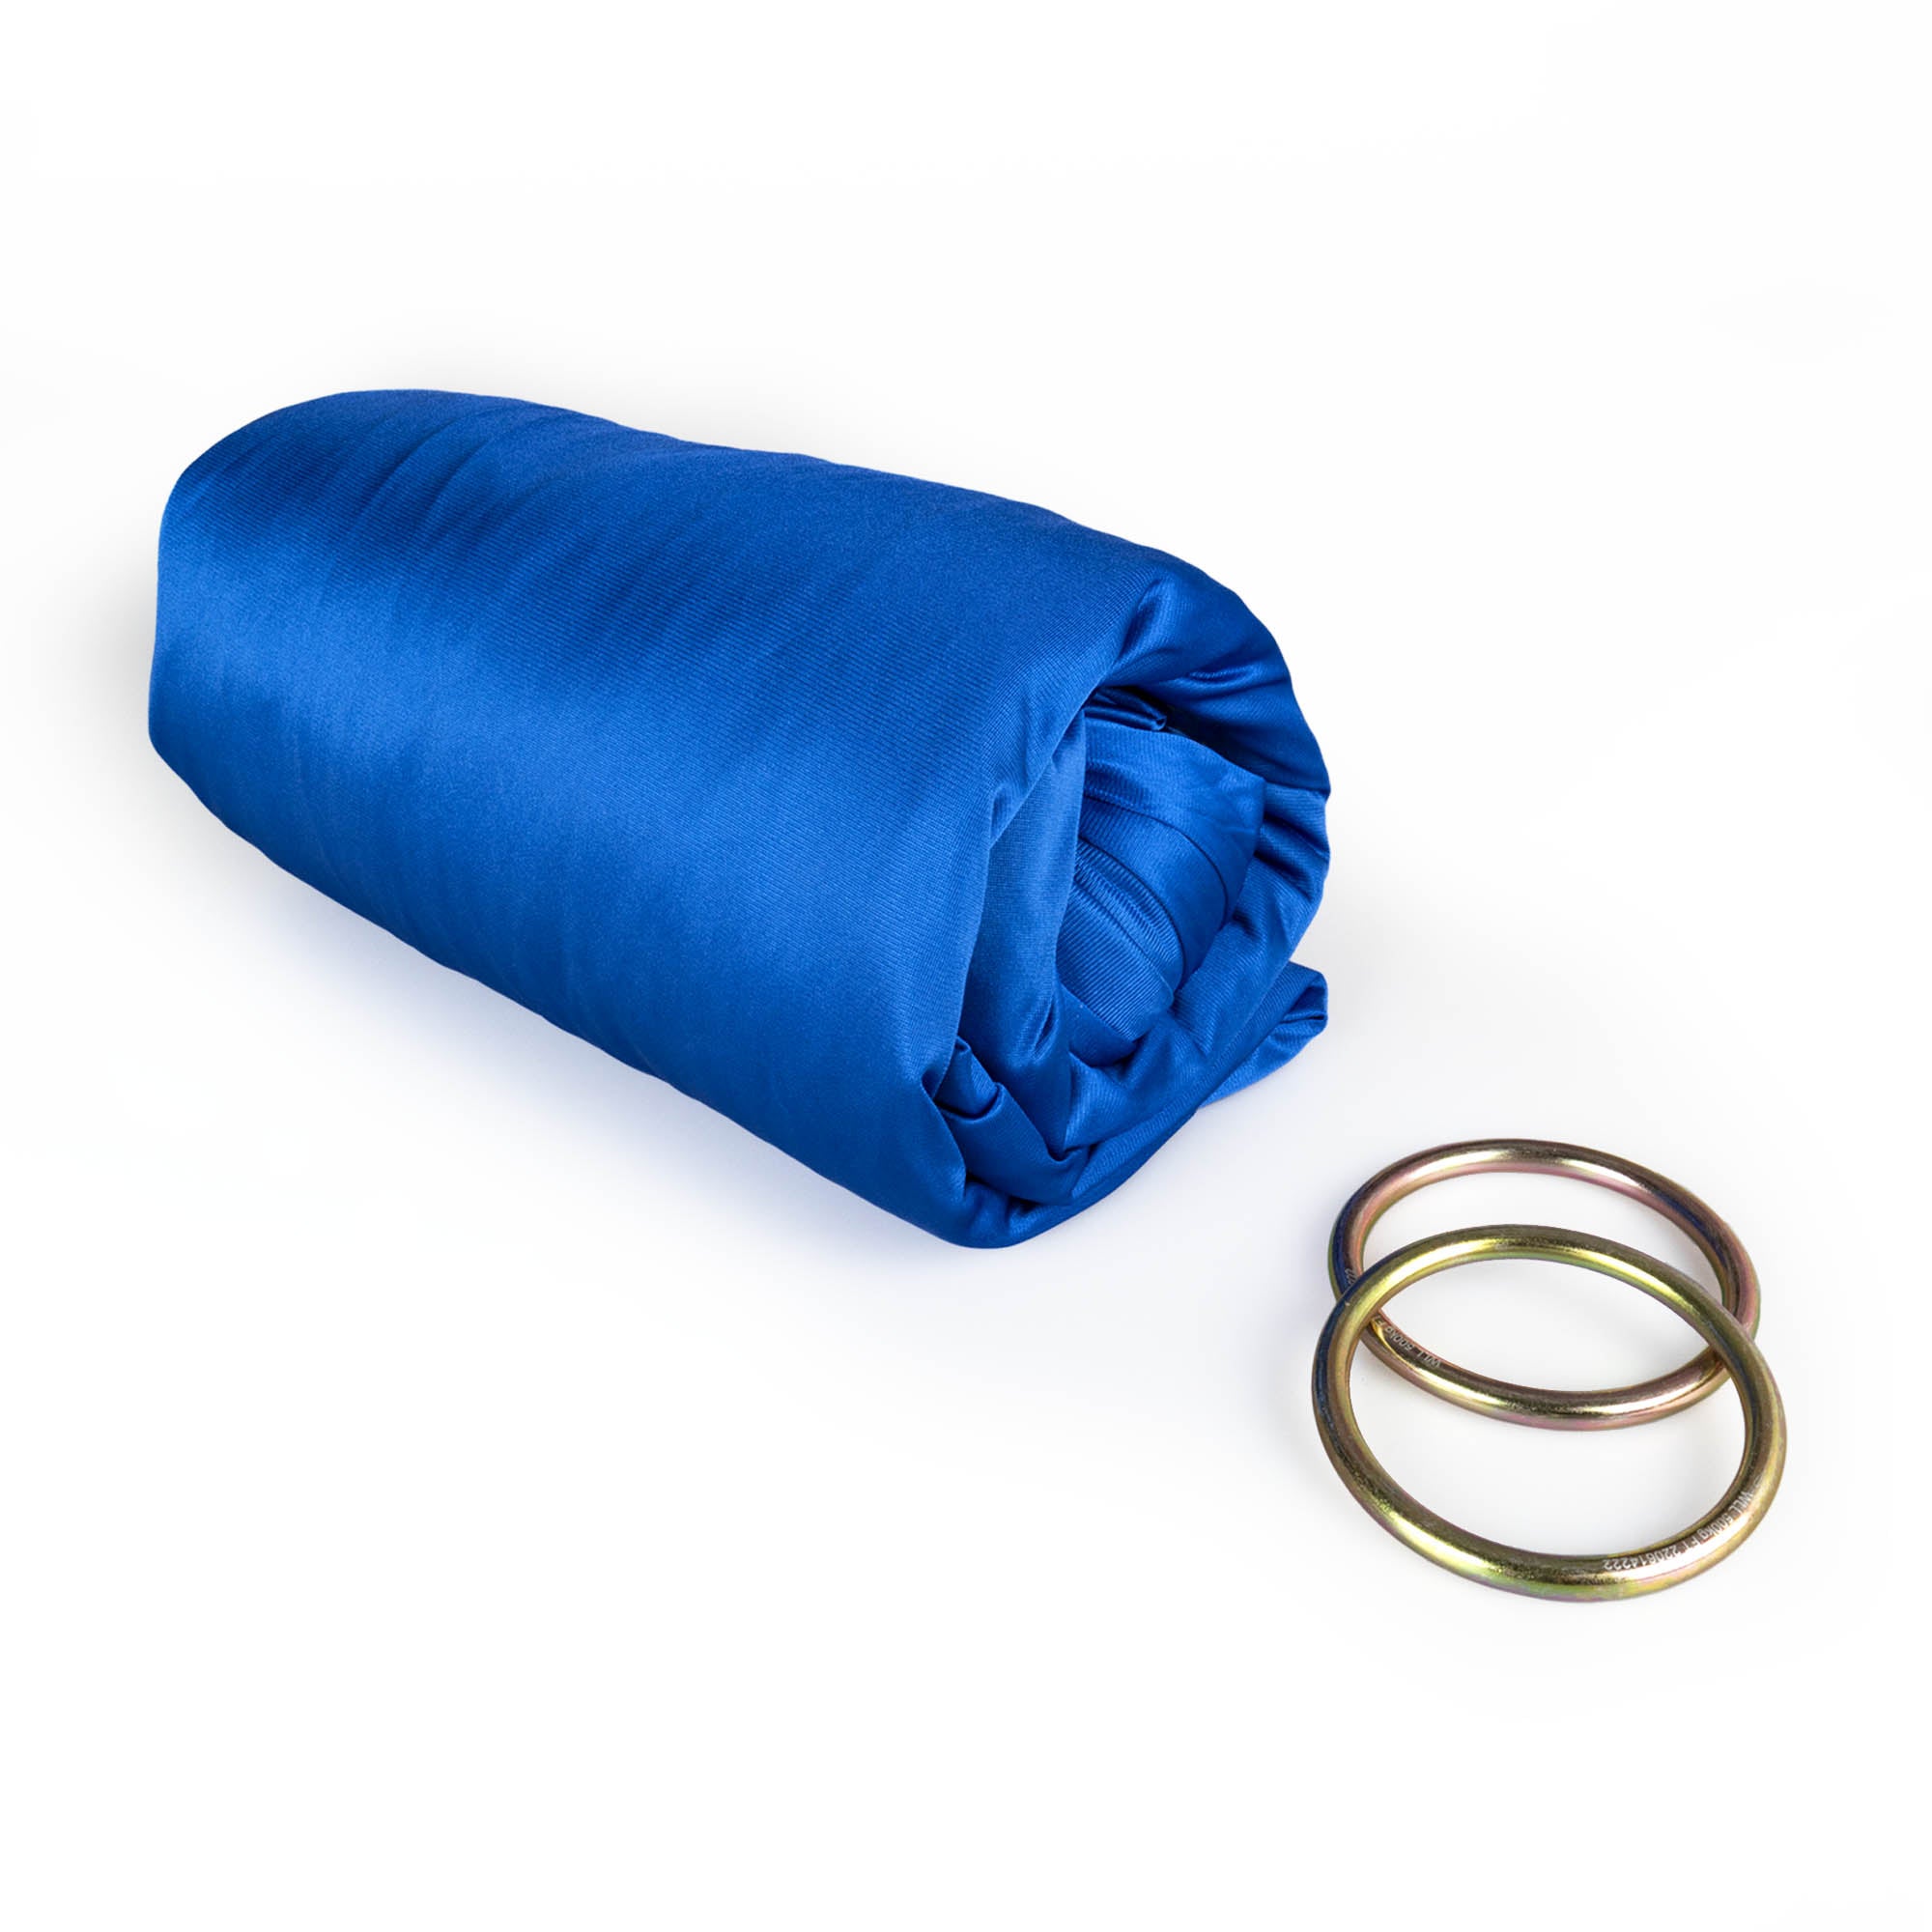 Blue yoga hammock rolled up with rings detached